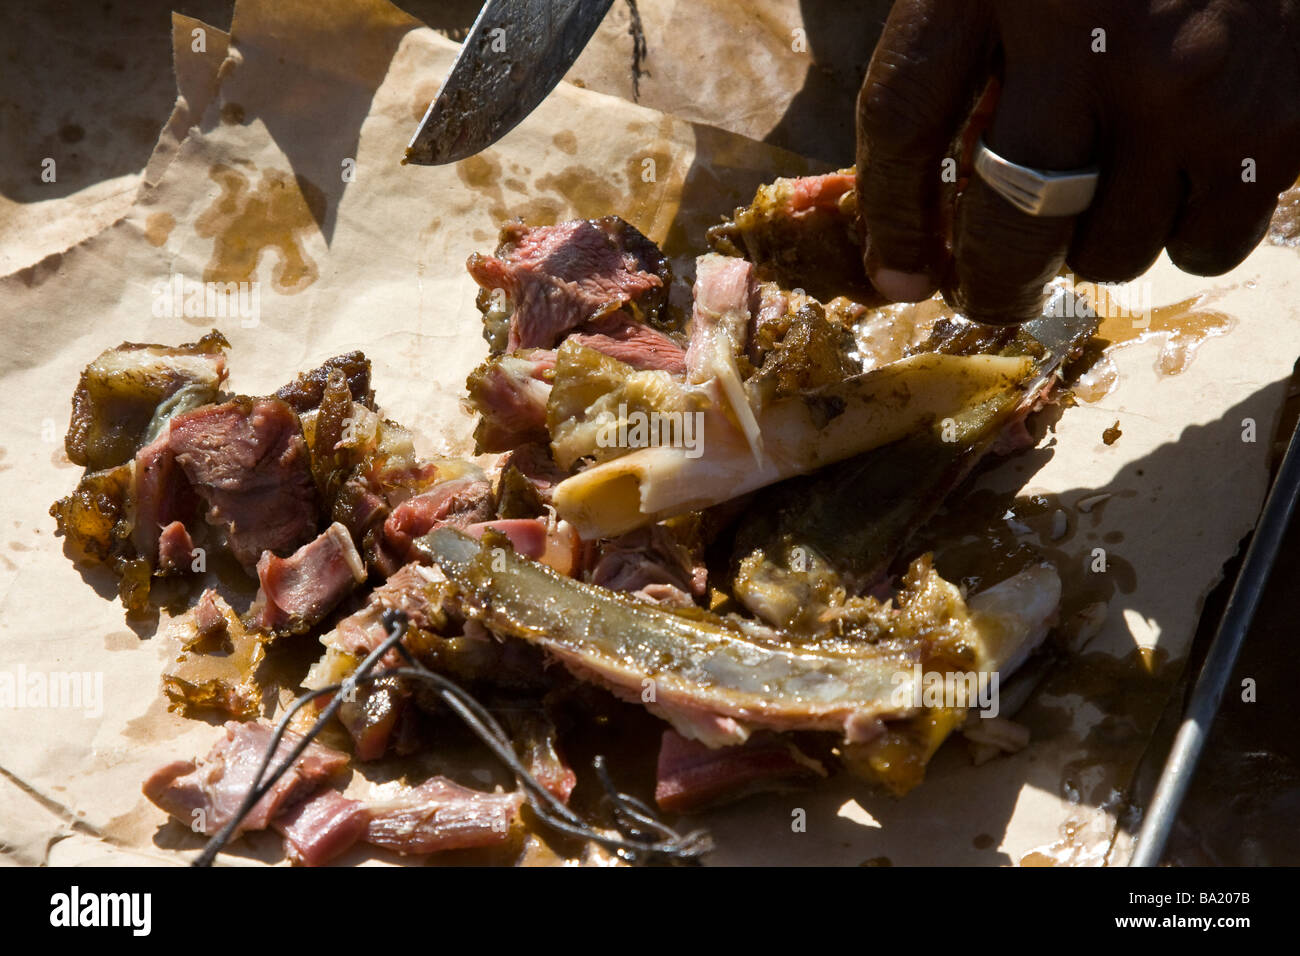 Senegalese Man Selling Roast Mutton in Senegal West Africa Stock Photo